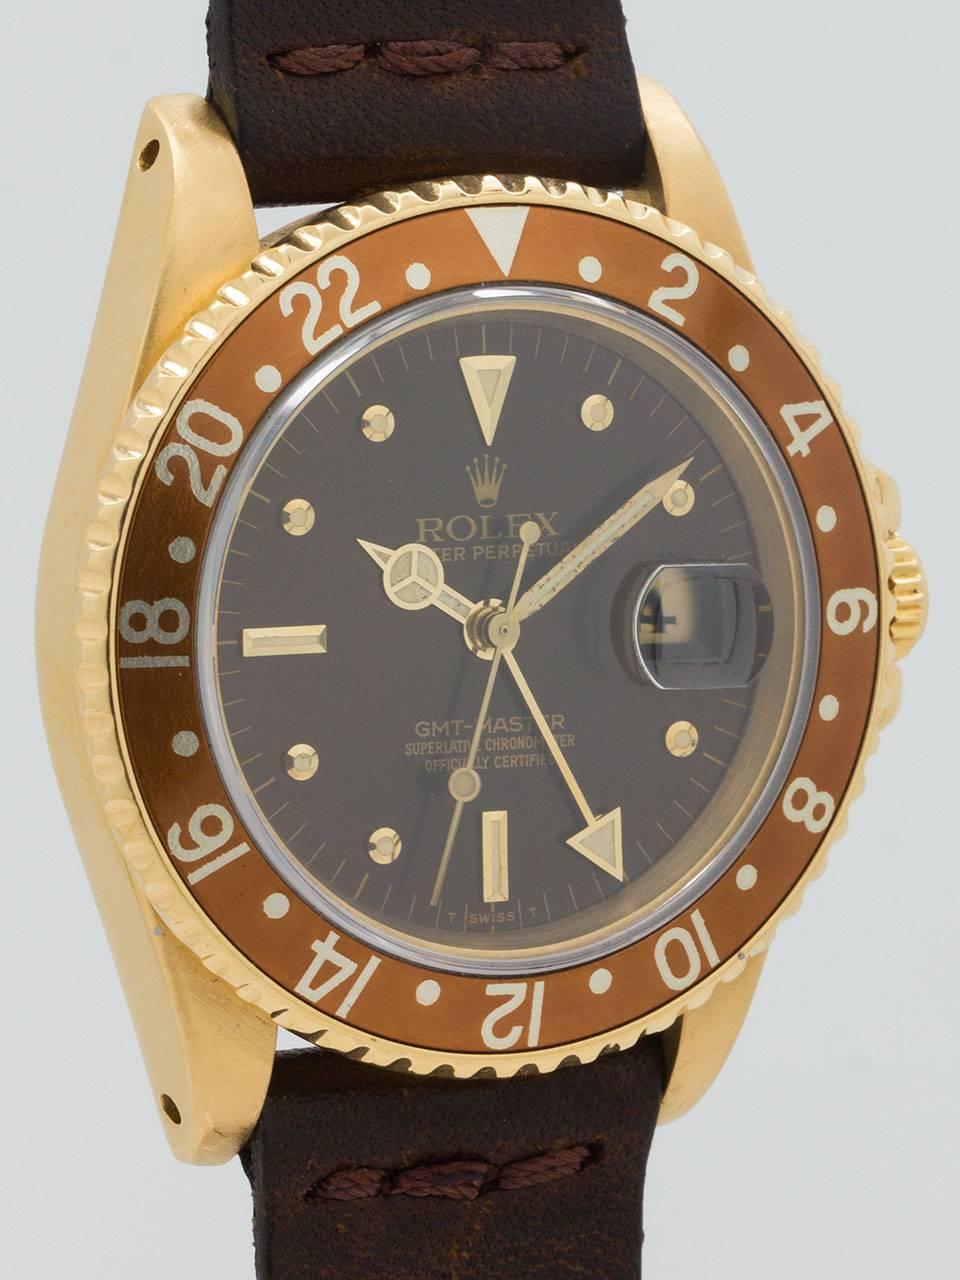 Rolex GMT-Master 18K Yellow Gold ref 16758 circa 1985. Popular transitional model 40mm diameter case, sapphire crystal and bronze 24 hour bezel. Beautiful vintage era bronze “nipple” indexes dial with gilt hands. Powered by self winding movement